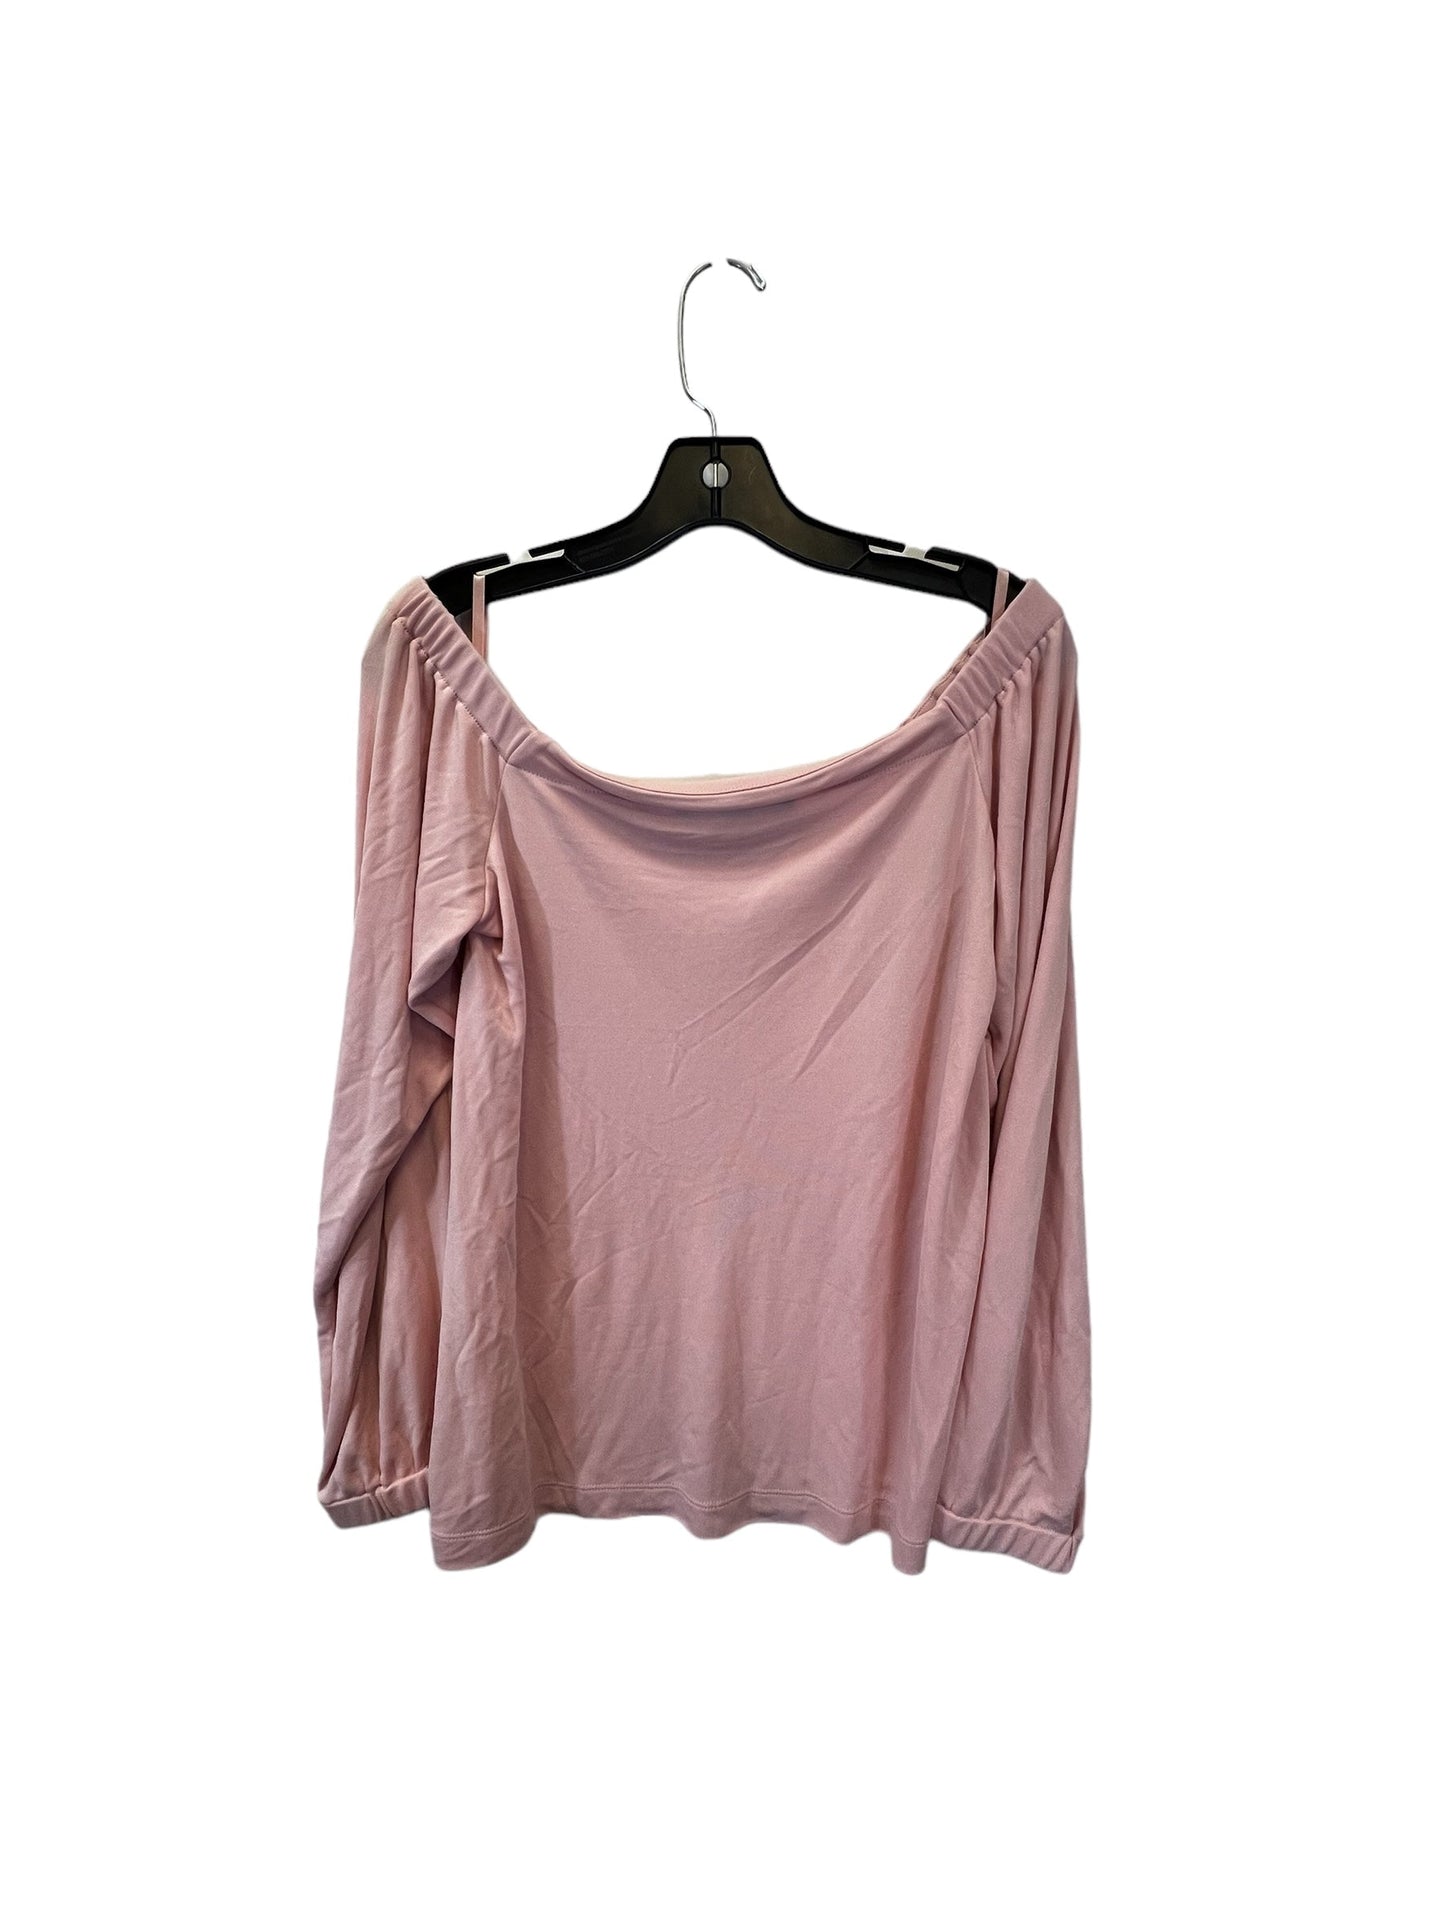 Pink Top Long Sleeve White House Black Market, Size M